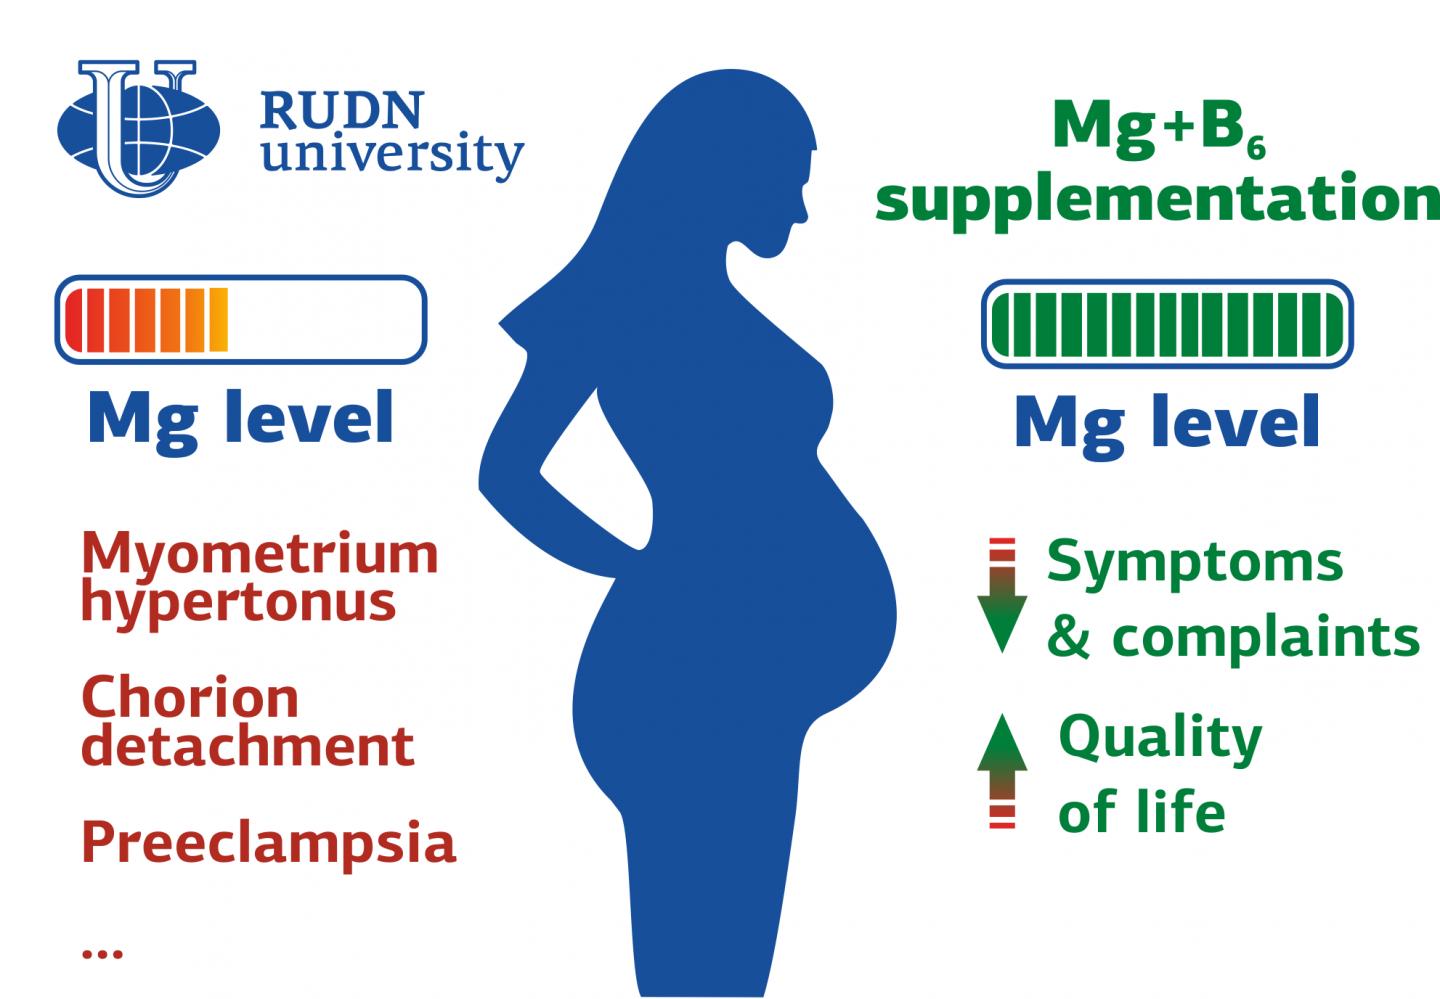 RUDN University Professor Clarified the Benefits of Magnesium Supplementation in Pregnancy and Hormonal Disorders